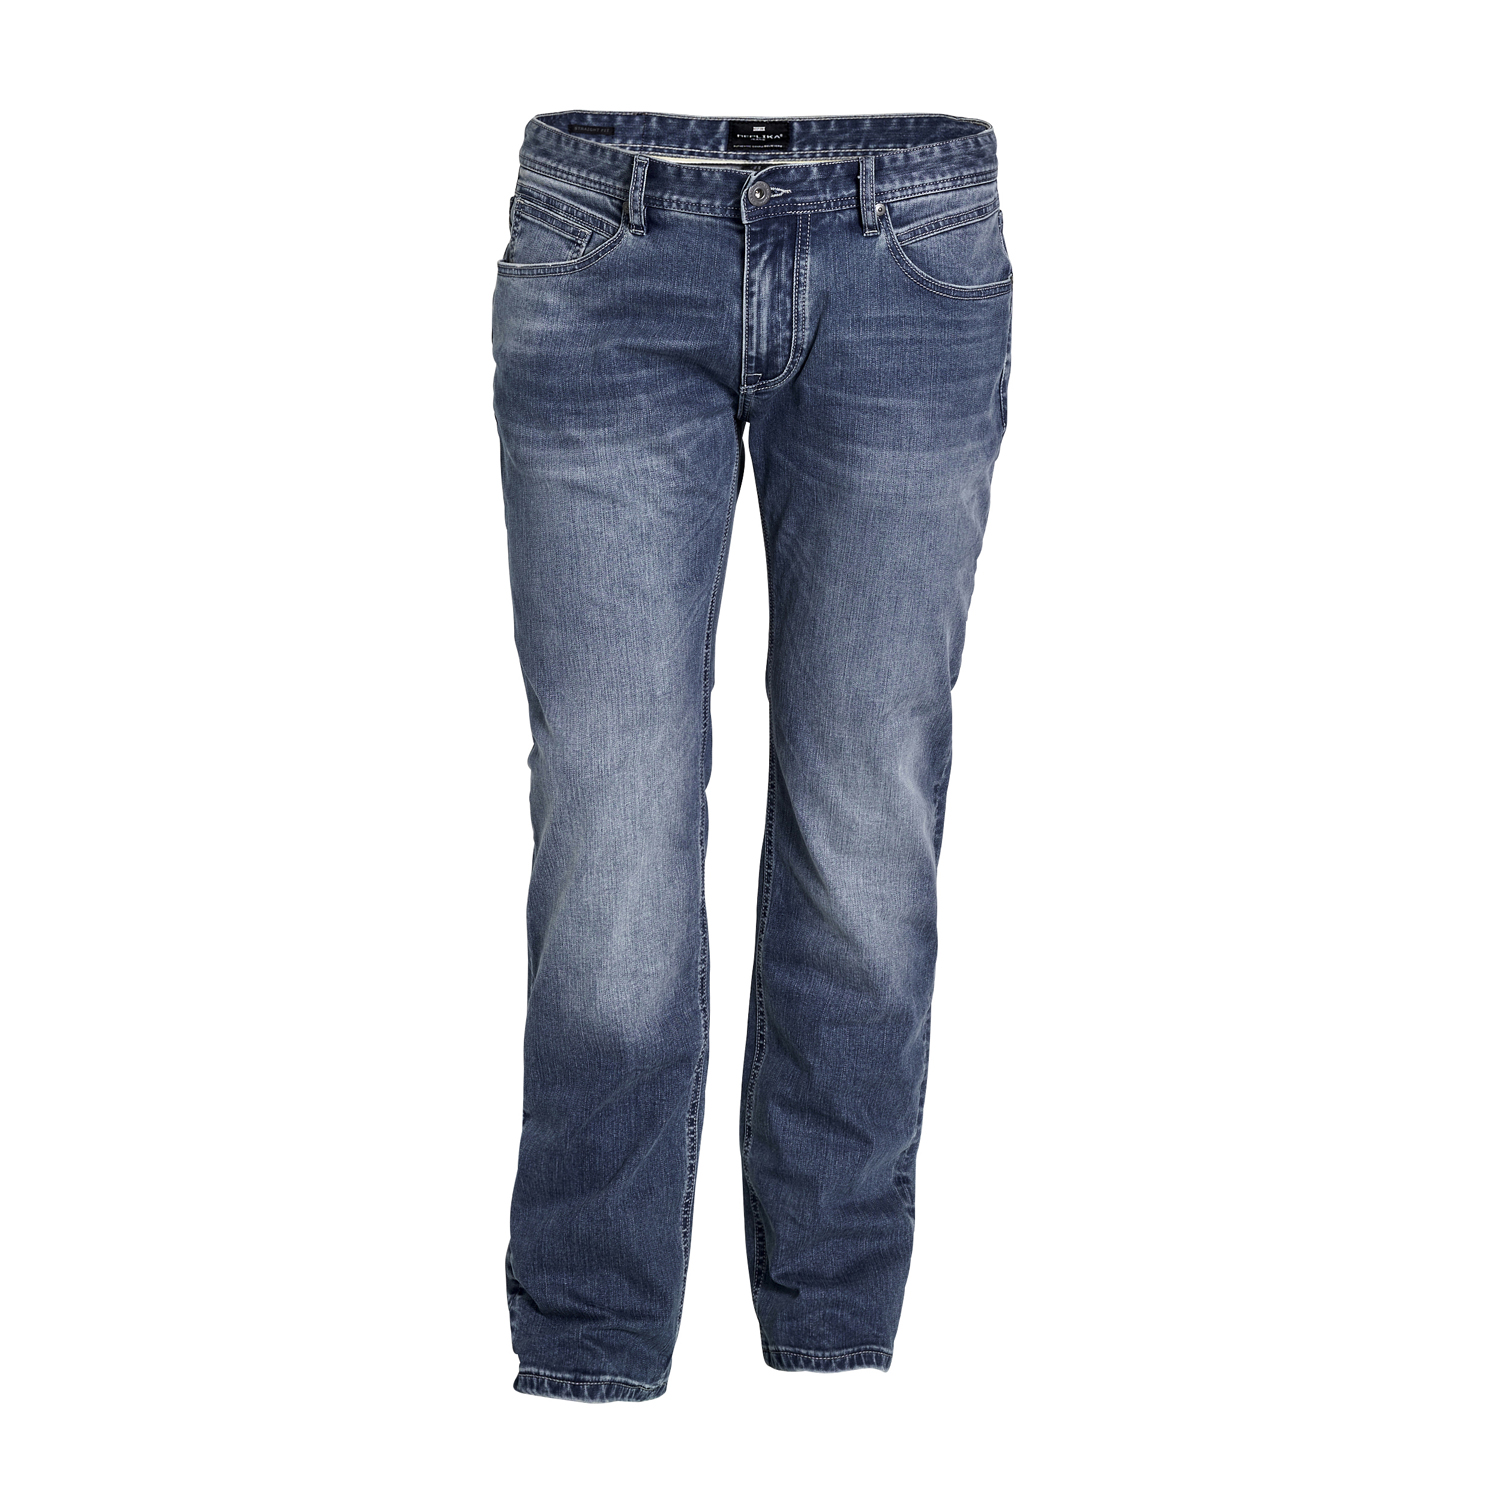 Blue used wash Jeans for men by Replika in oversizes up to 62/34